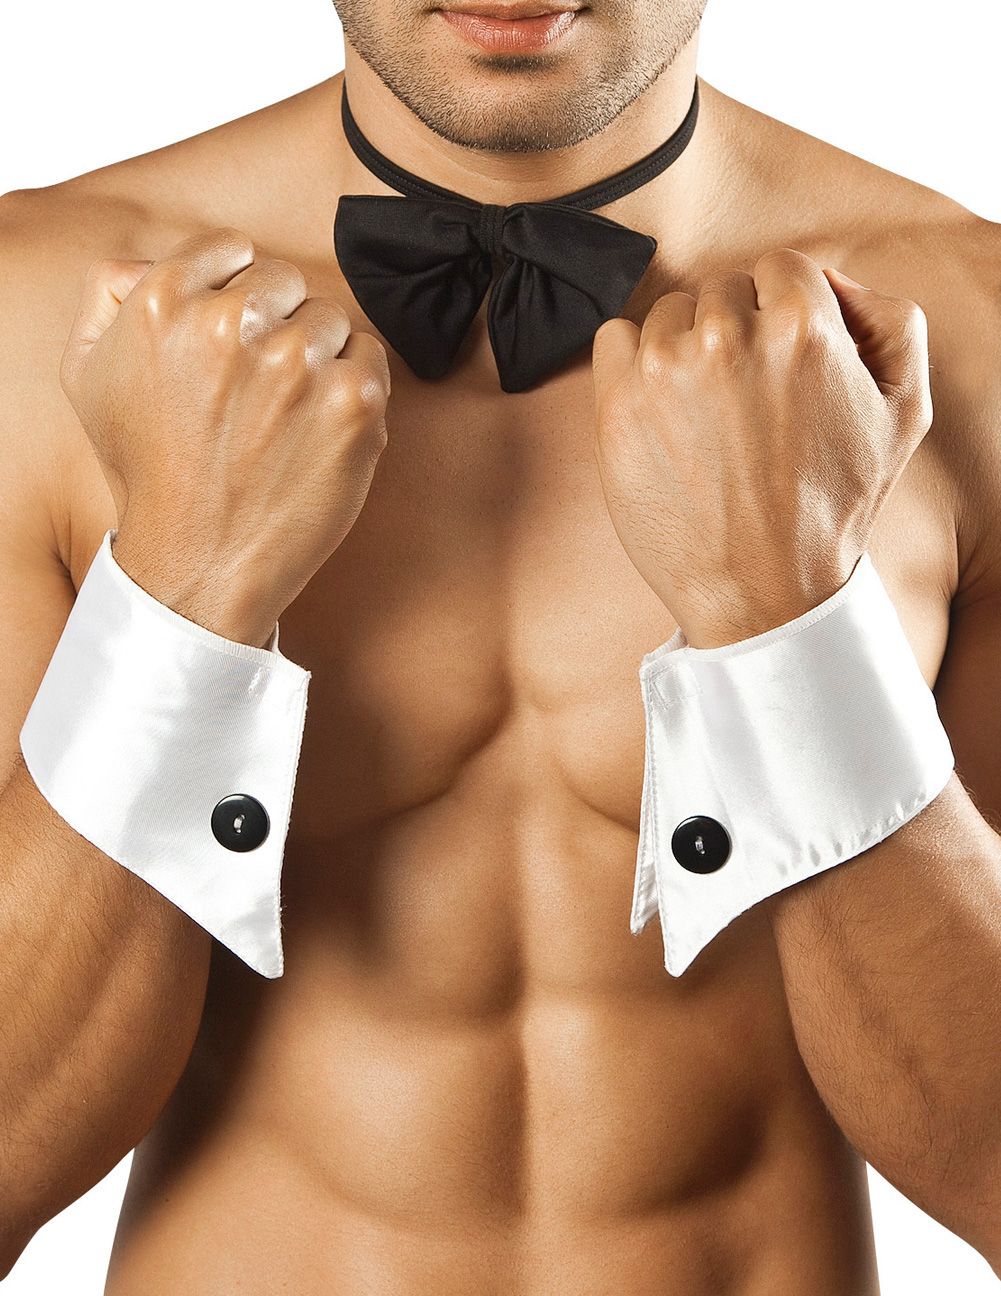 CandyMan 9646 Bowtie and Cuffs Black and White